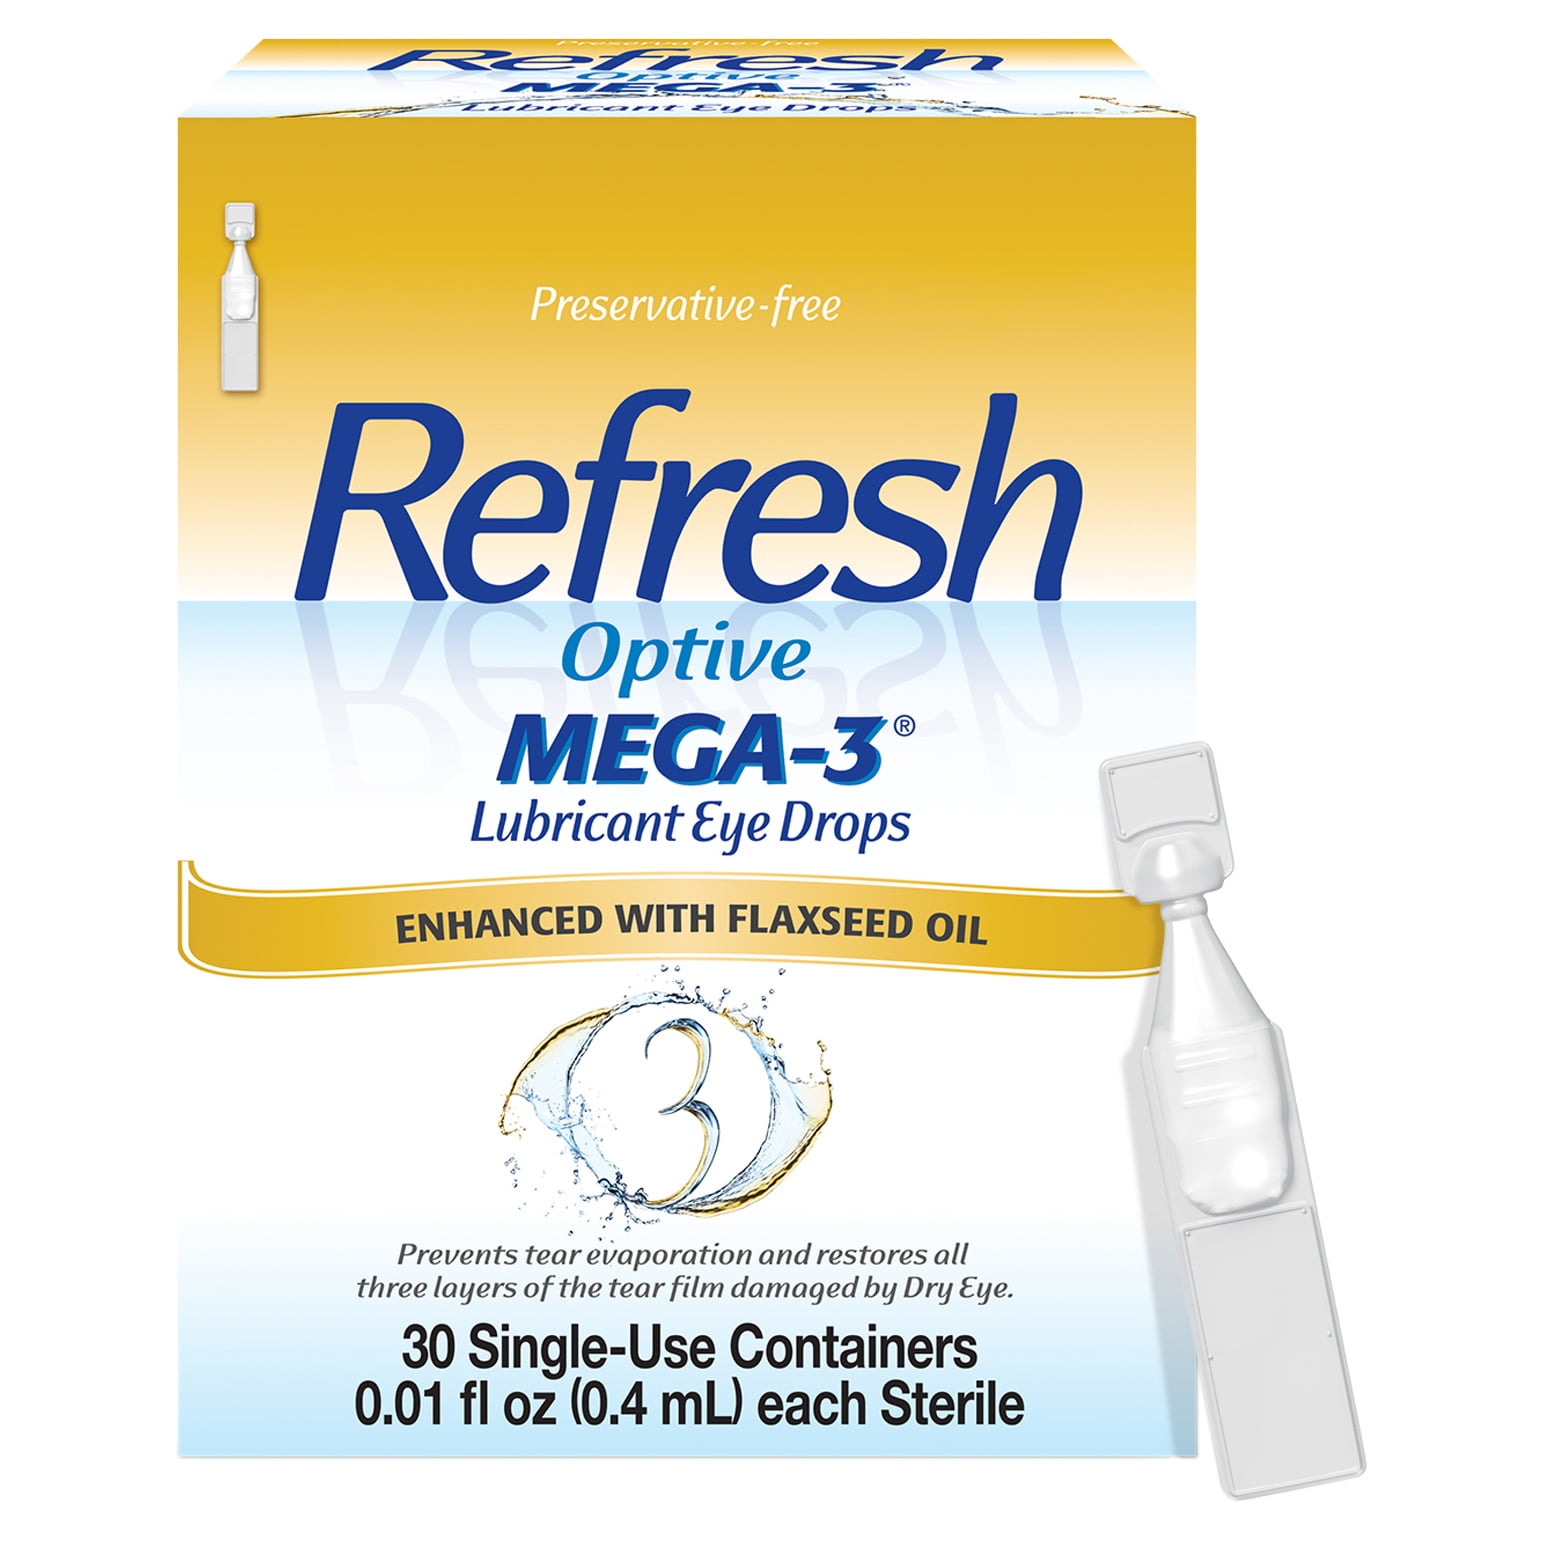 Refresh Optive Mega-3 Lubricant Eye Drops Non-Preserved Tears, 30 Single-Use Containers, 0.4 mL